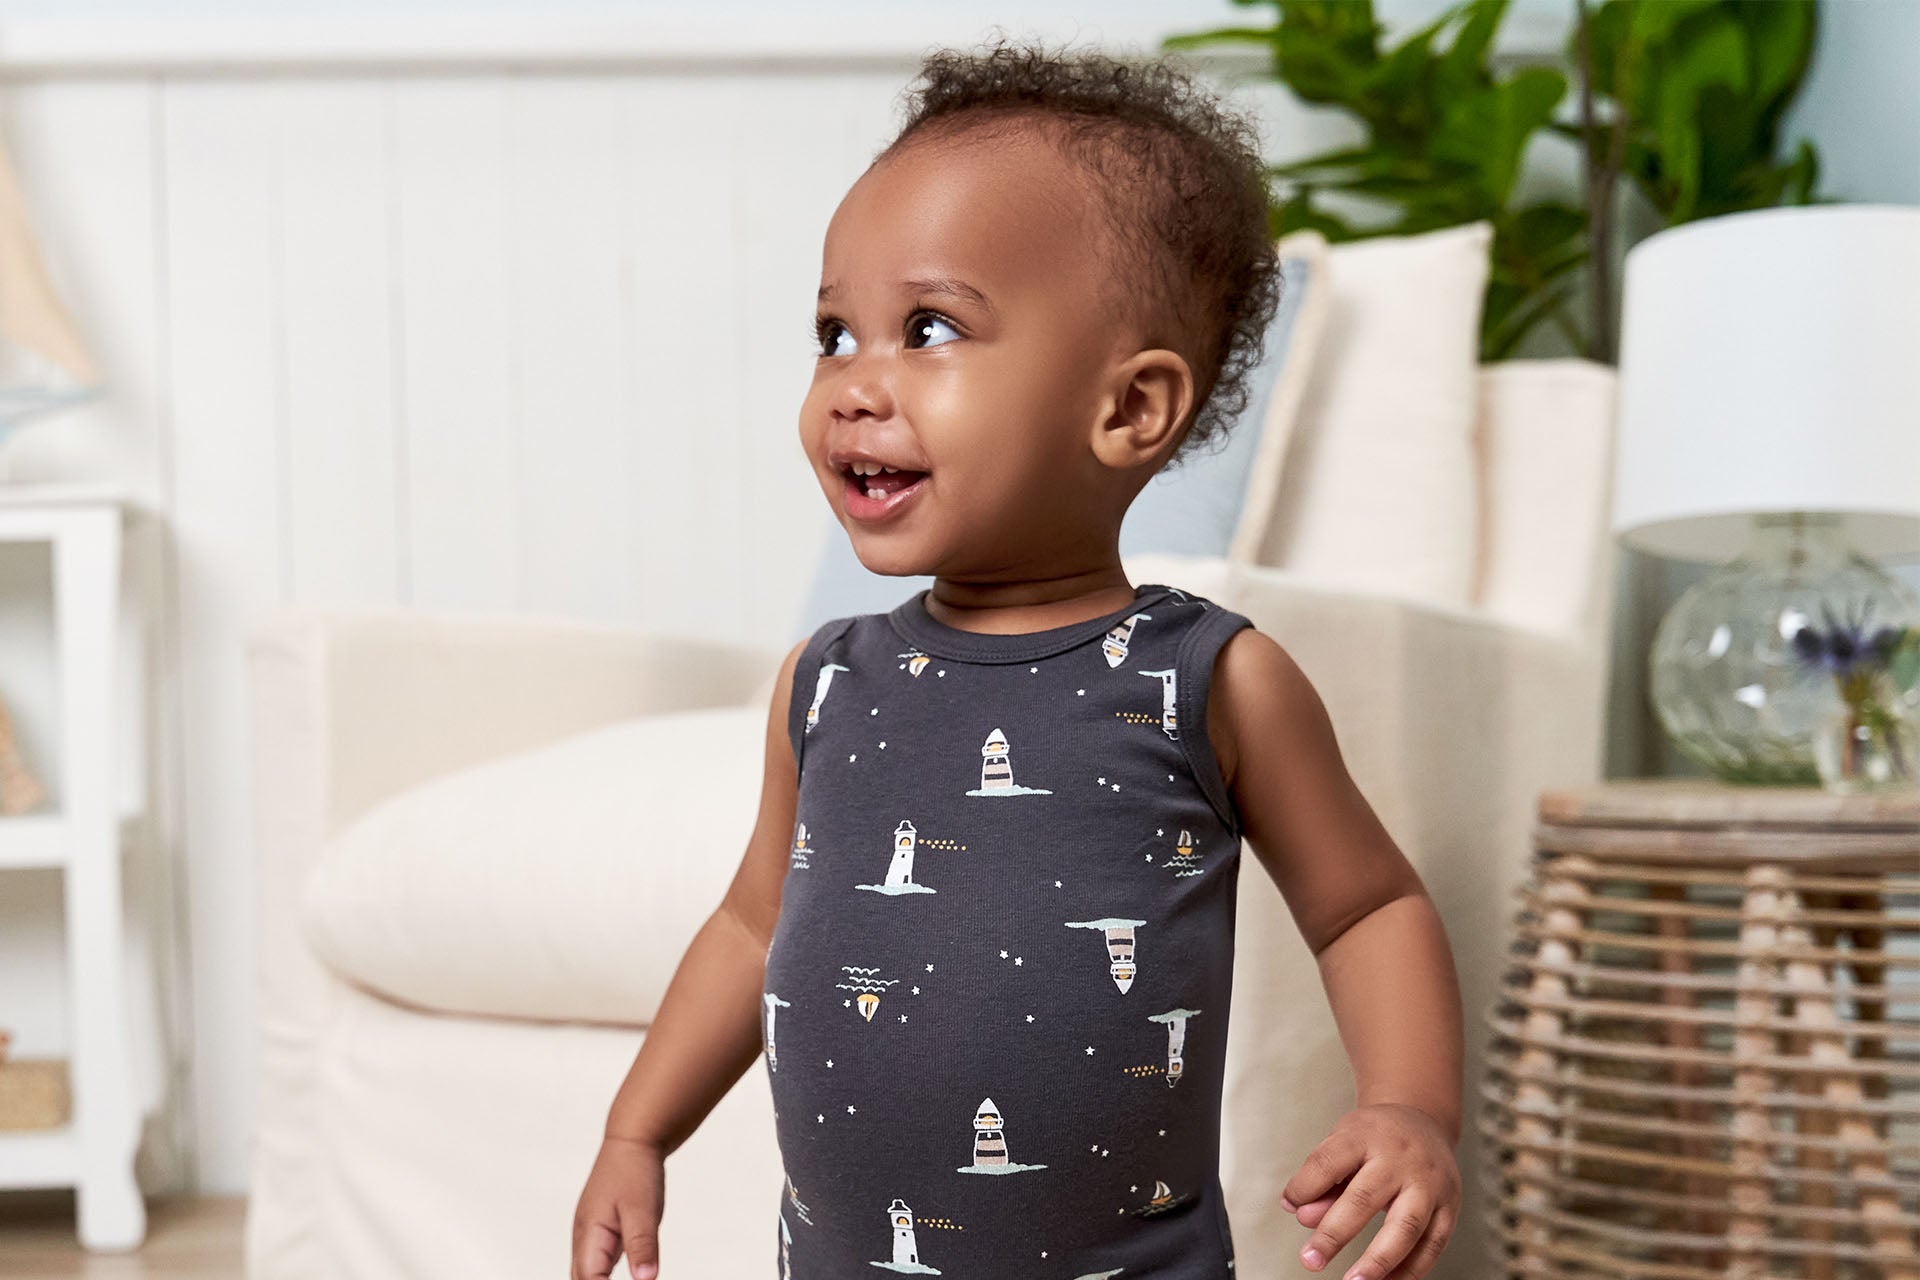 Toddler smiling in a room, wearing a dark onesie with lighthouse prints.